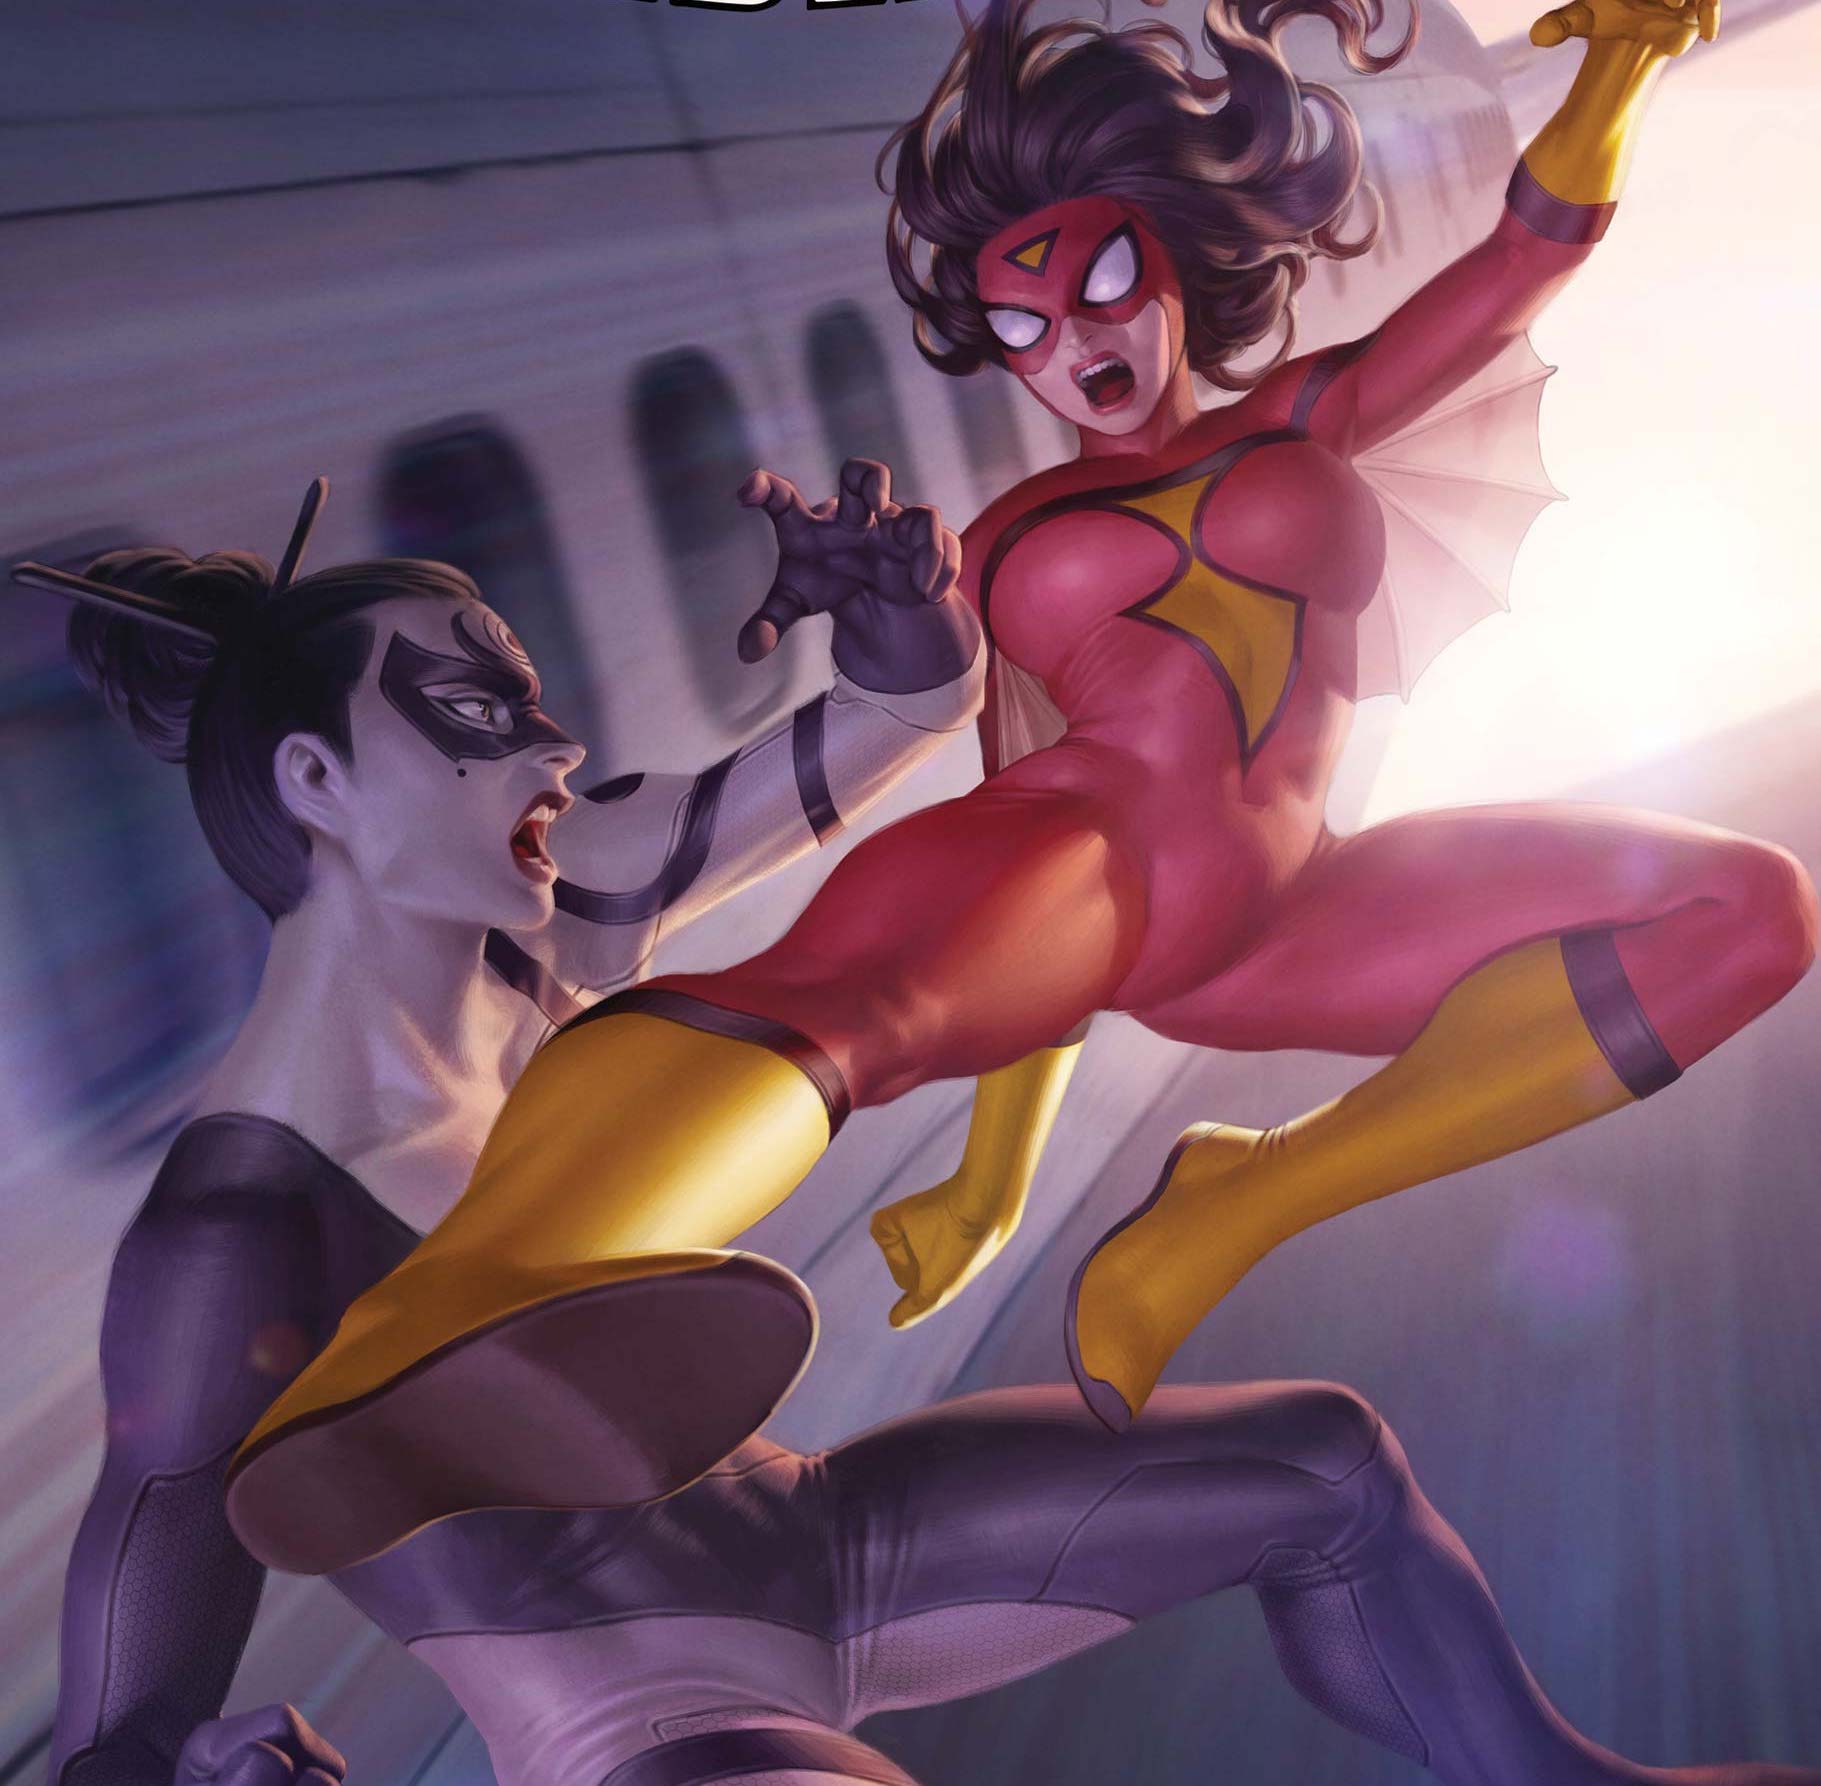 'Spider-Woman' #13 is about as fun as comics can get